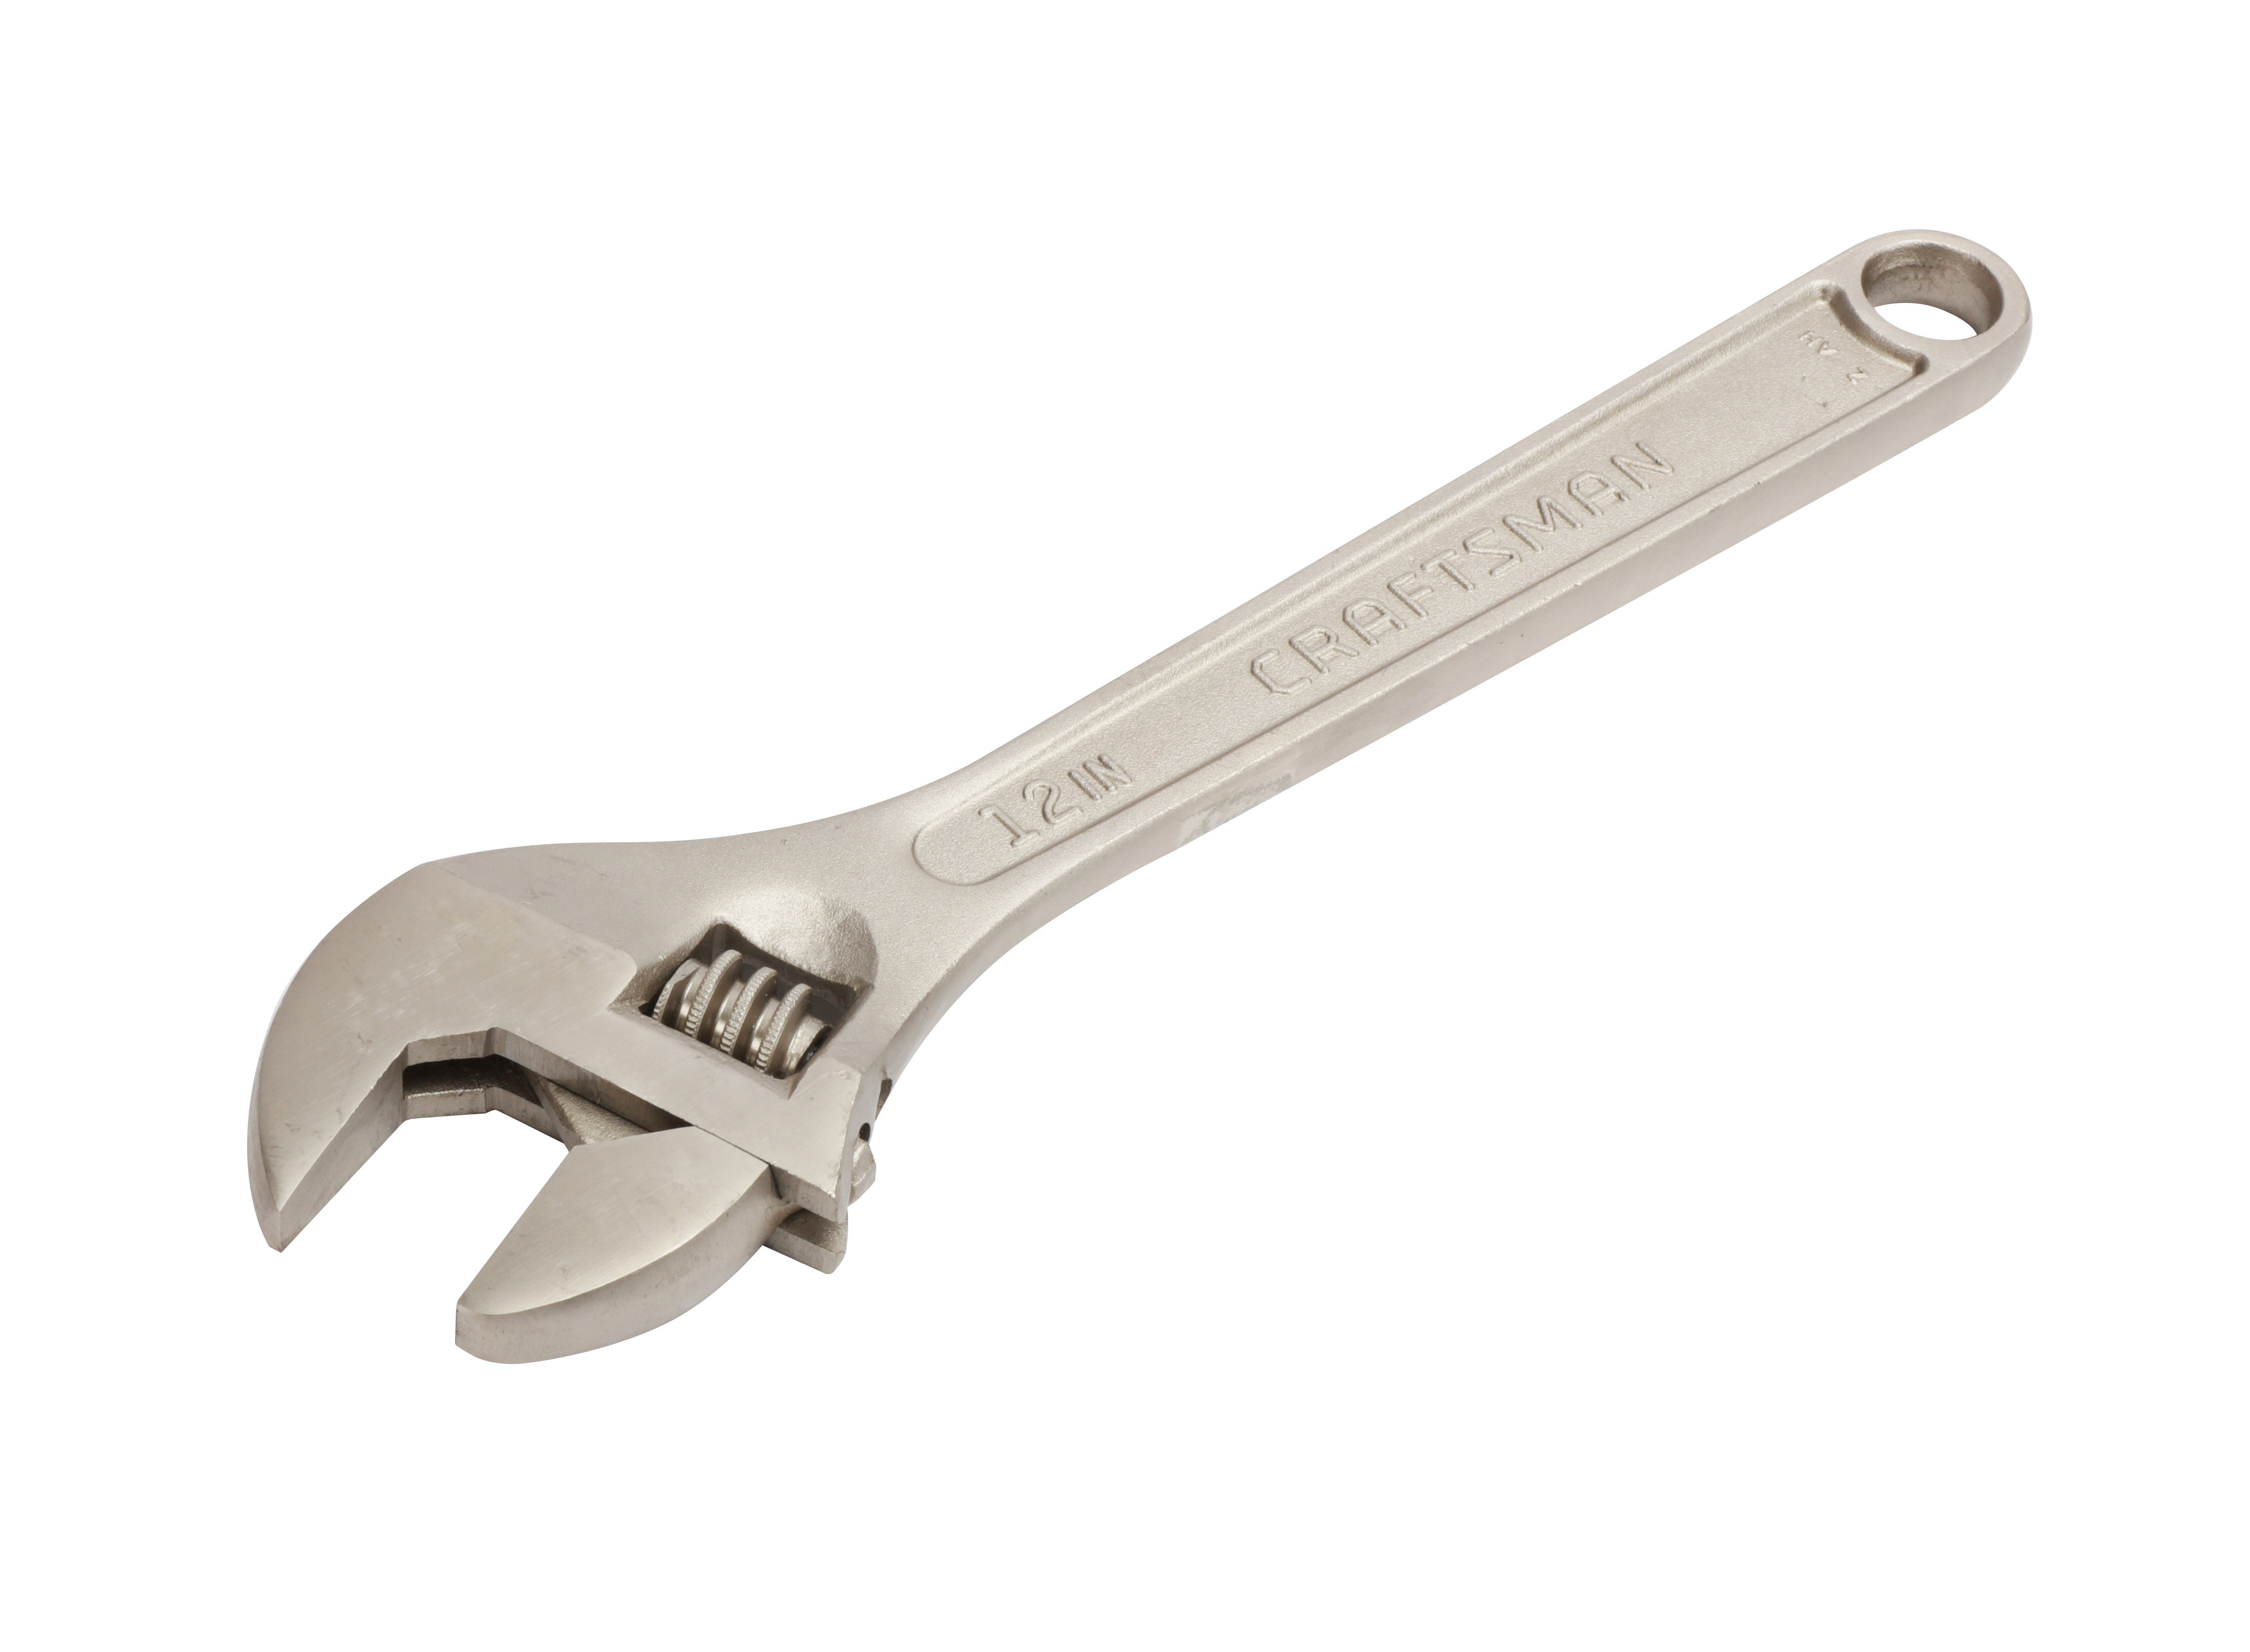 CRAFTSMAN Adjustable Wrench CMMT82339 12-Inch Reversible Jaw 